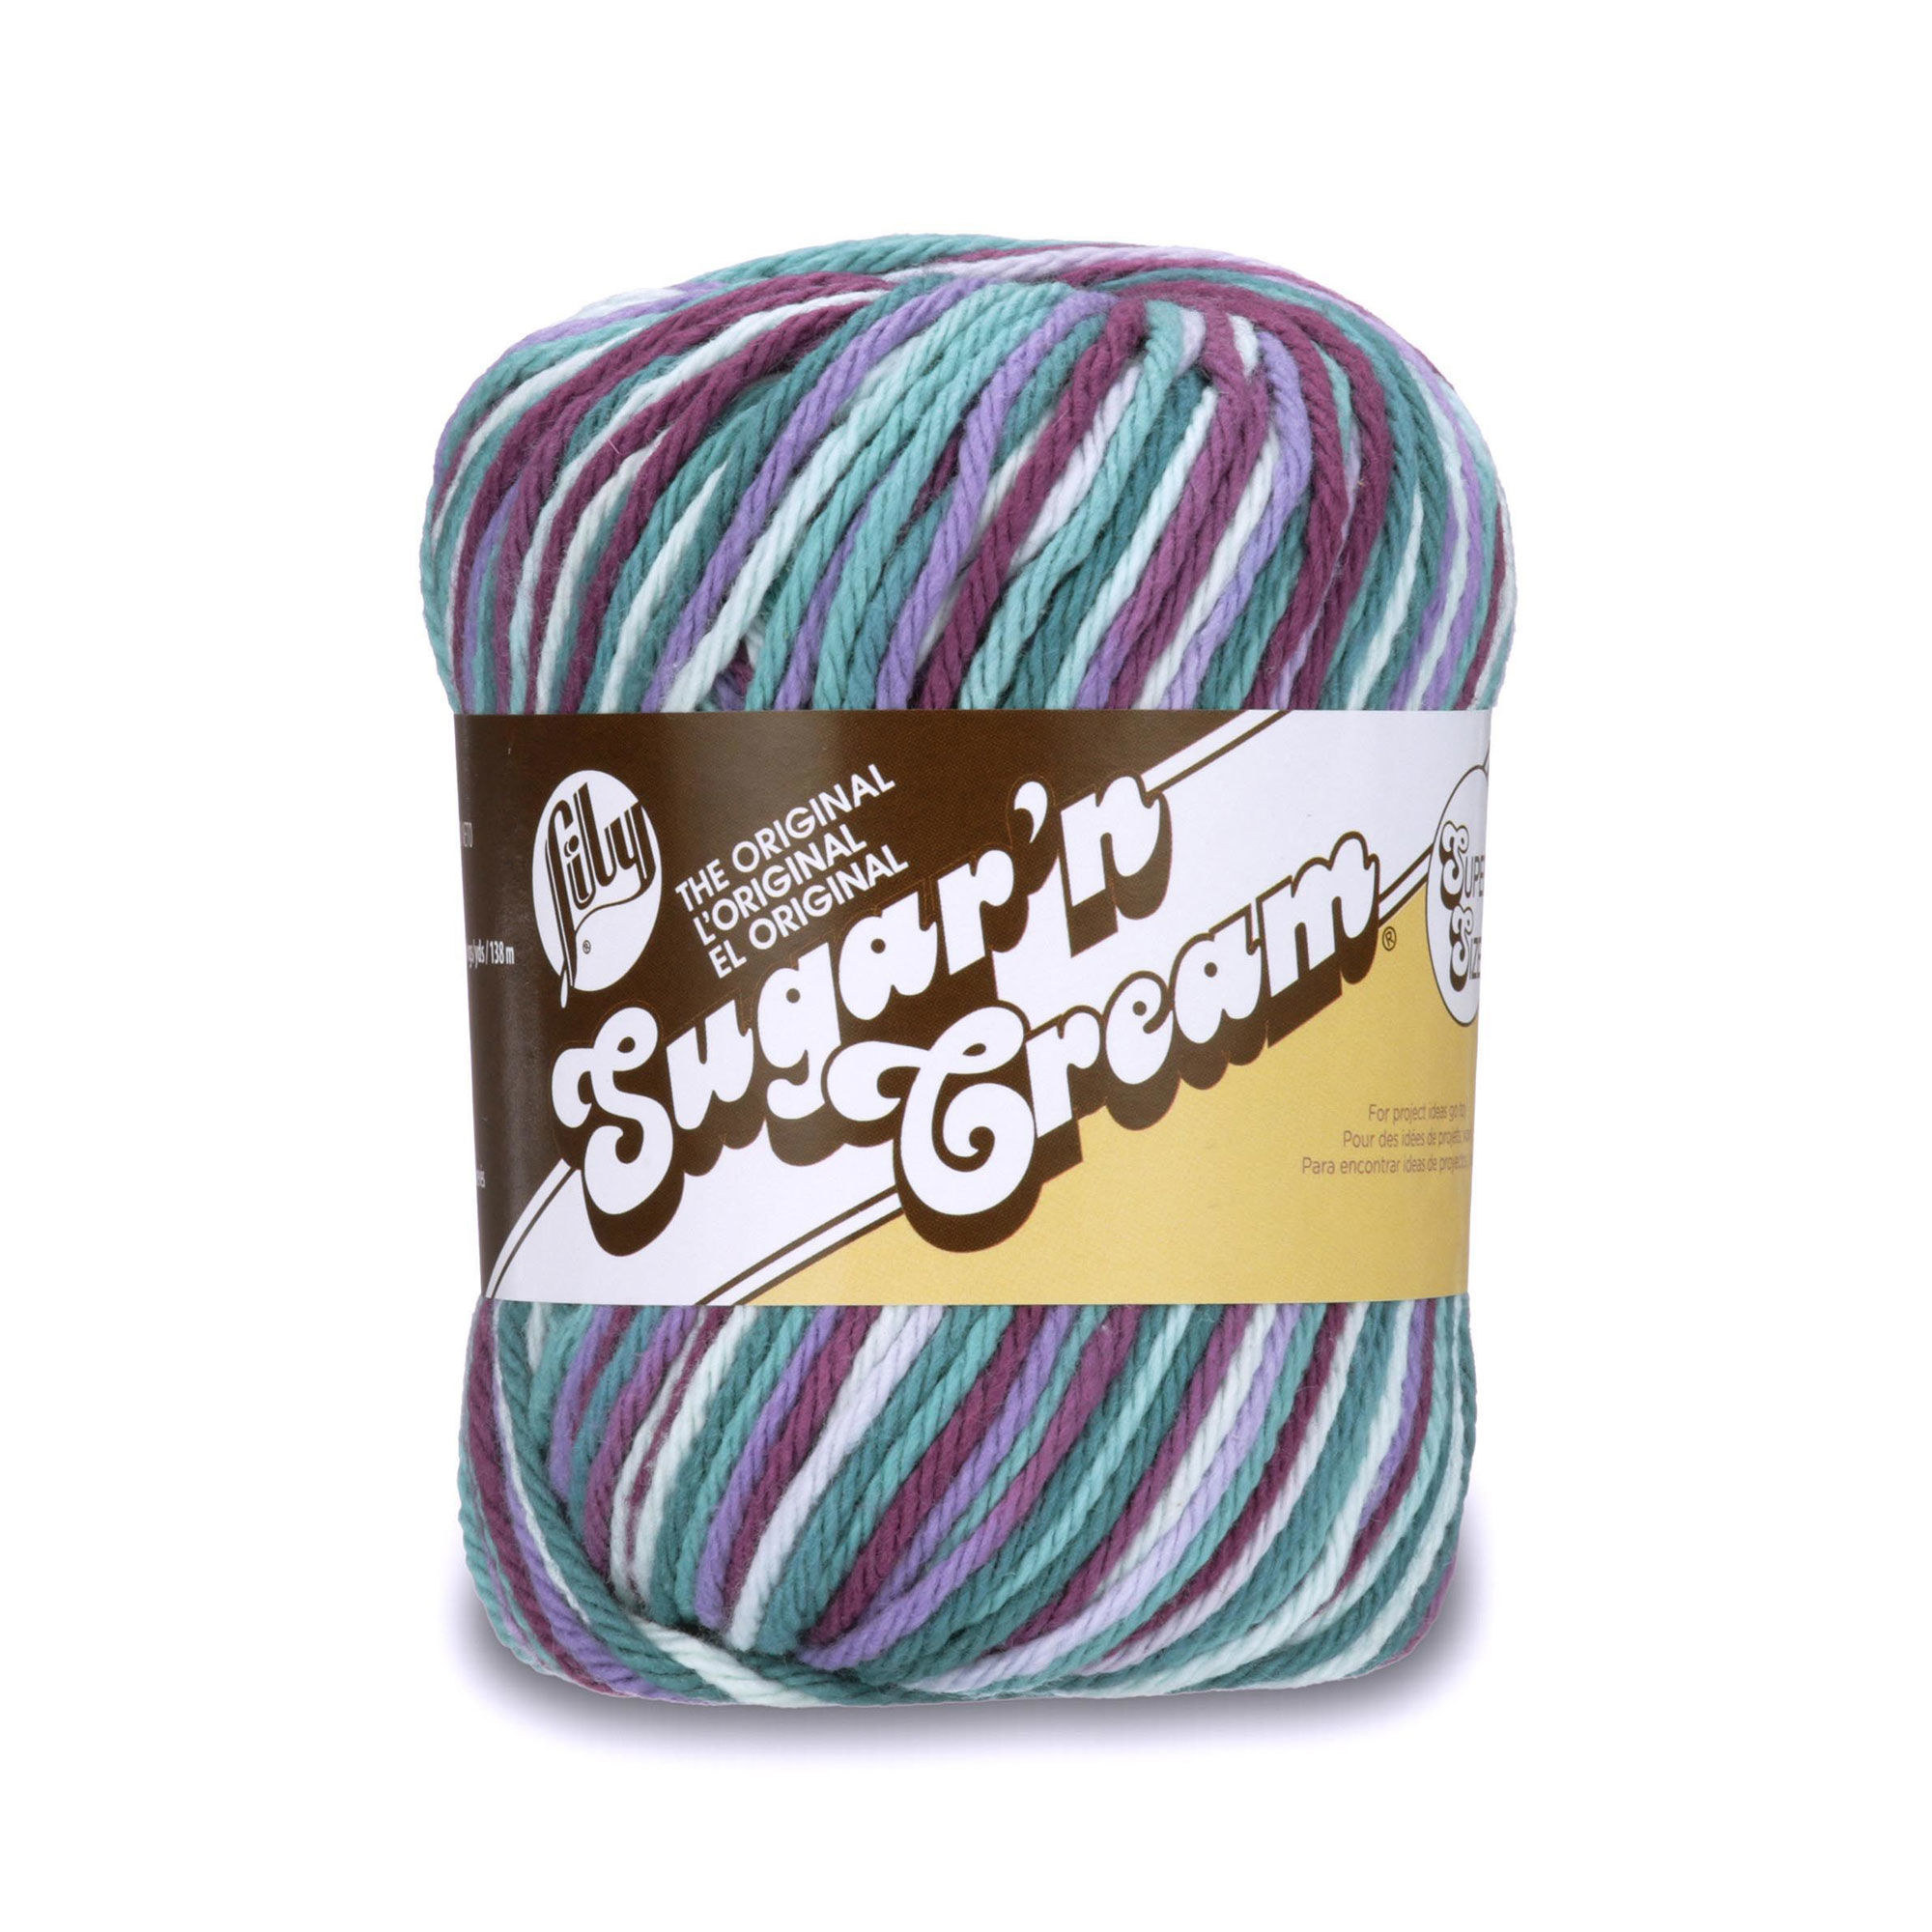 Lily Sugar'n Cream Yarn - Ombres Super Size Crown Jewels